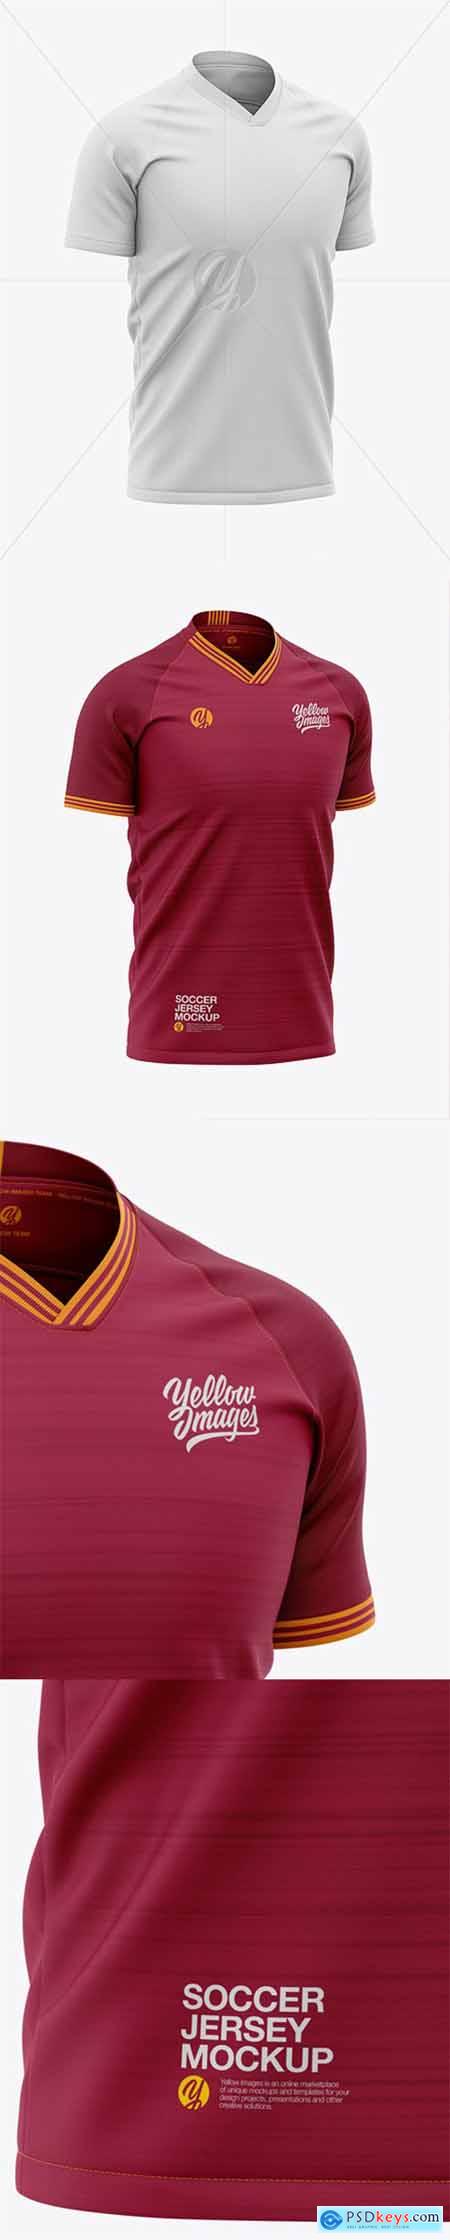 Download 22+ Netball Dress With V-Neck Hq Mockup Half Side View ...